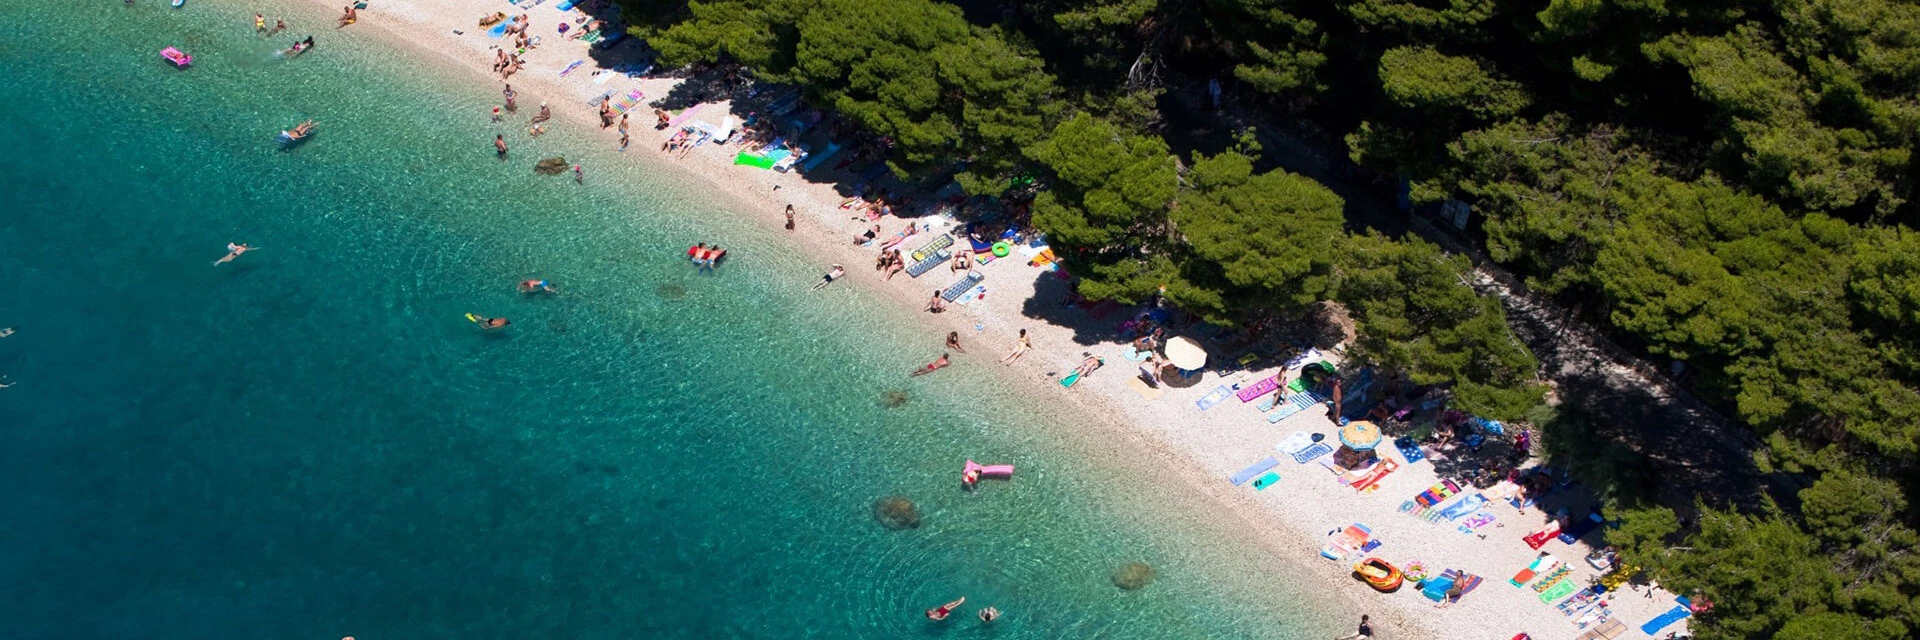 Enjoy the clear blue and energetic green colors of Podgora